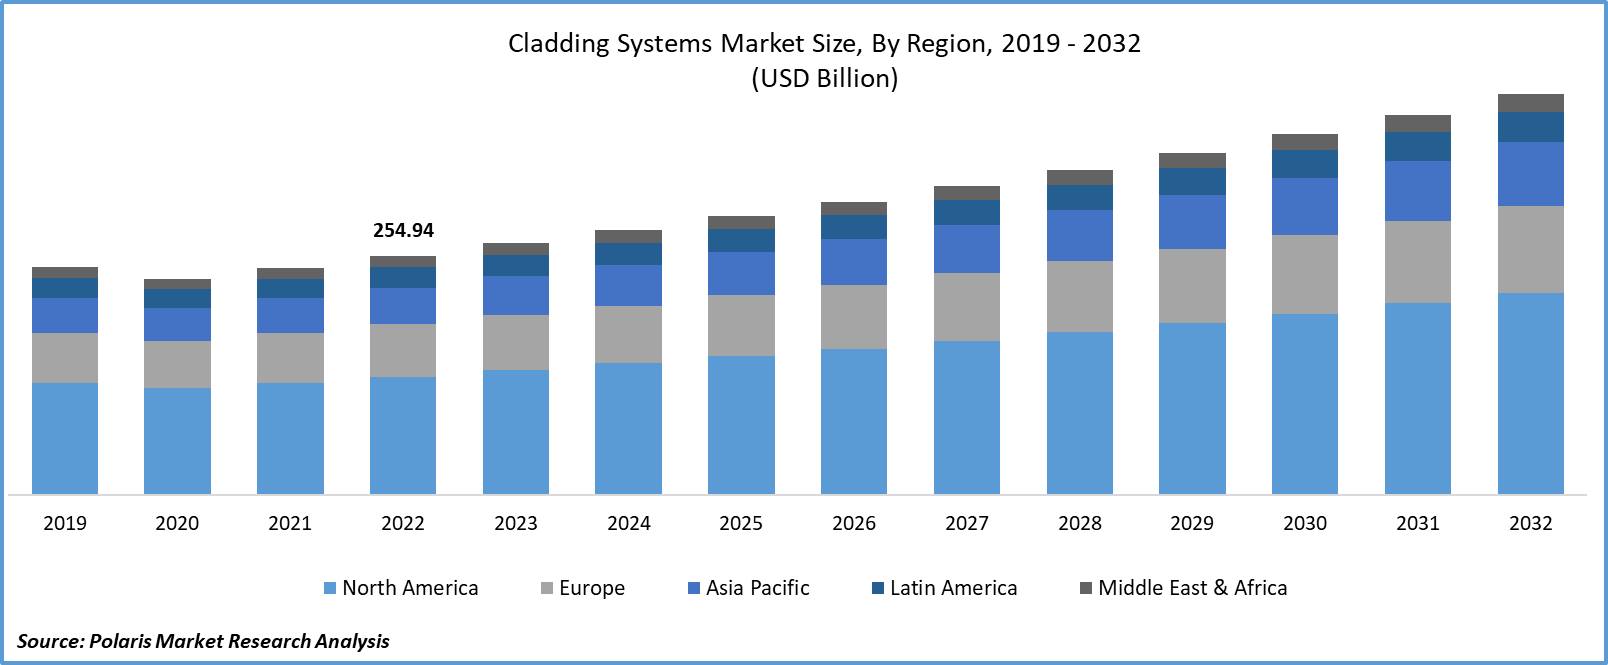 Cladding Systems Market Size